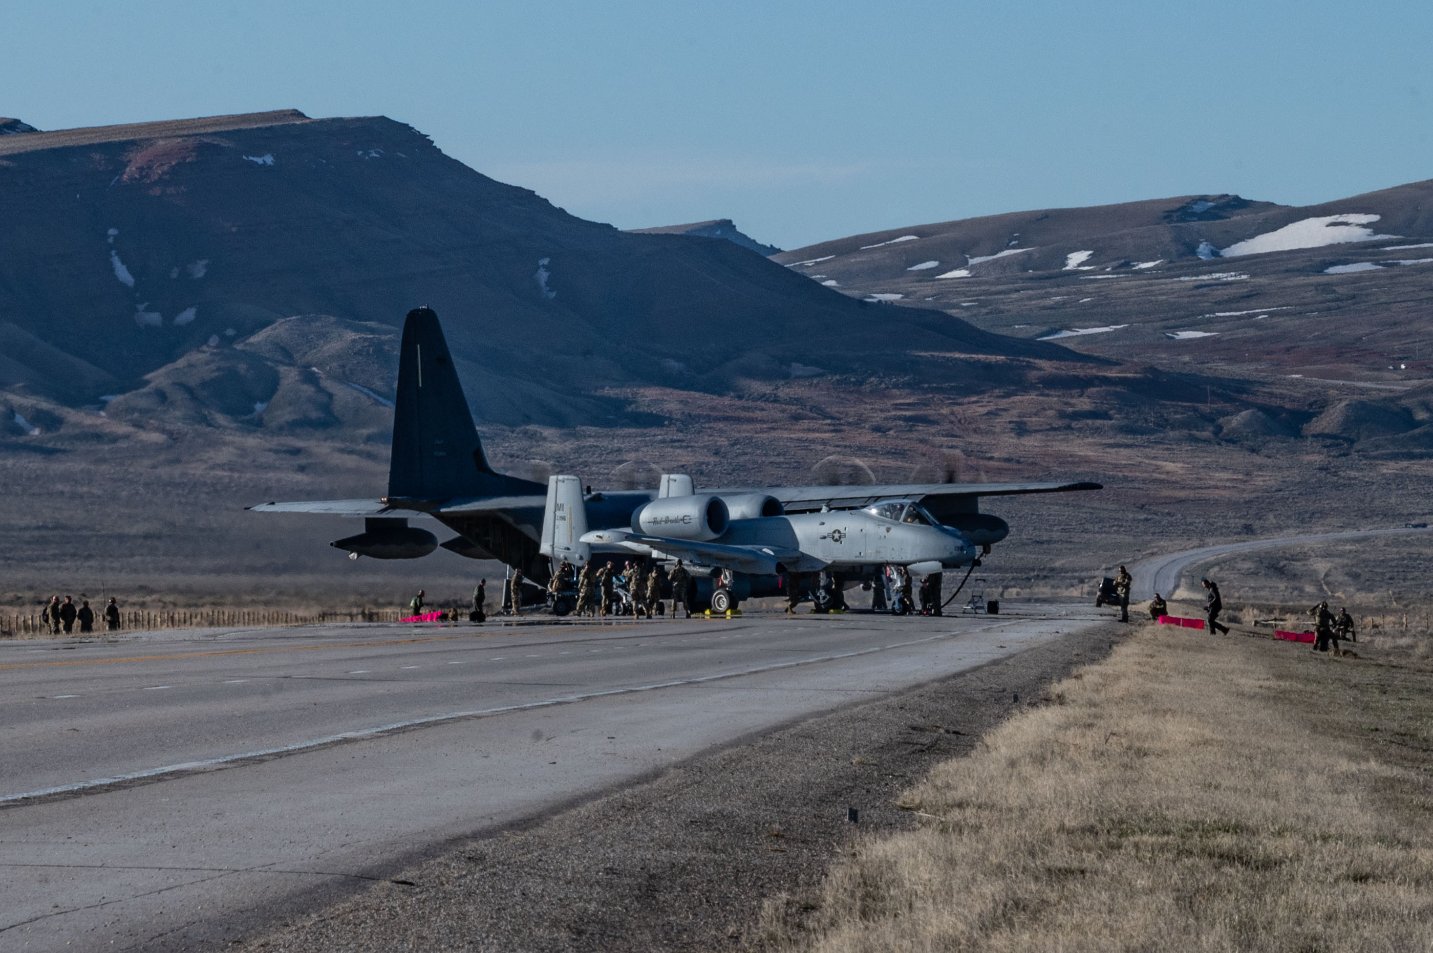 An MC-130J Commando II offloads fuel to an A-10 Thunderbolt II on Highway 287 during Exercise Agile Chariot, April 30, 2023, honing capabilities linked to Agile Combat Employment. Instead of relying on large, fixed bases and infrastructure, ACE uses smaller, more dispersed locations and teams to rapidly move and support aircraft, pilots, and other personnel to wherever they are needed. There are millions of miles of public roads in the United States, including federal, state, and local roads – with Agile Combat Employment, including Forward Arming and Refueling Point (FARP) and Integrated Combat Turnarounds (ICT), it becomes millions of miles of public runways, when necessary. (U.S. Air Force photo by Tech. Sgt. Carly Kavish)